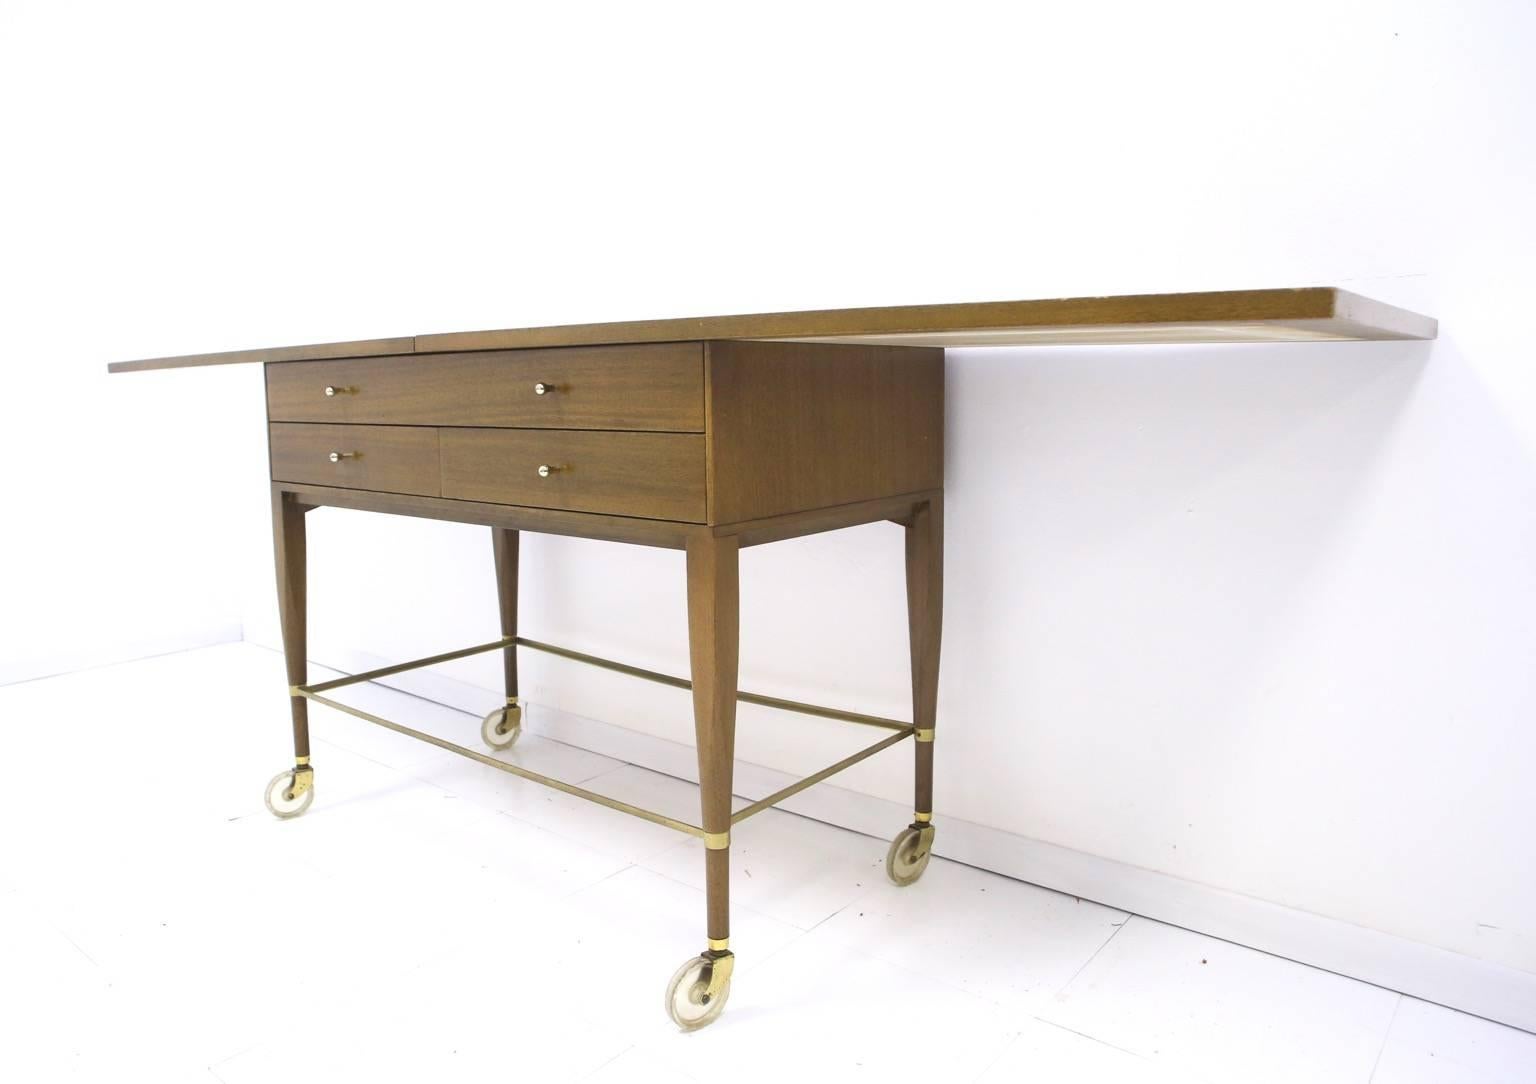 Very nice moveable serving cart by Paul McCobb for Calvin. Top has hinges that allow it to double in size. Sturdy construction of mahogany and brass with a brass framed glass shelf.